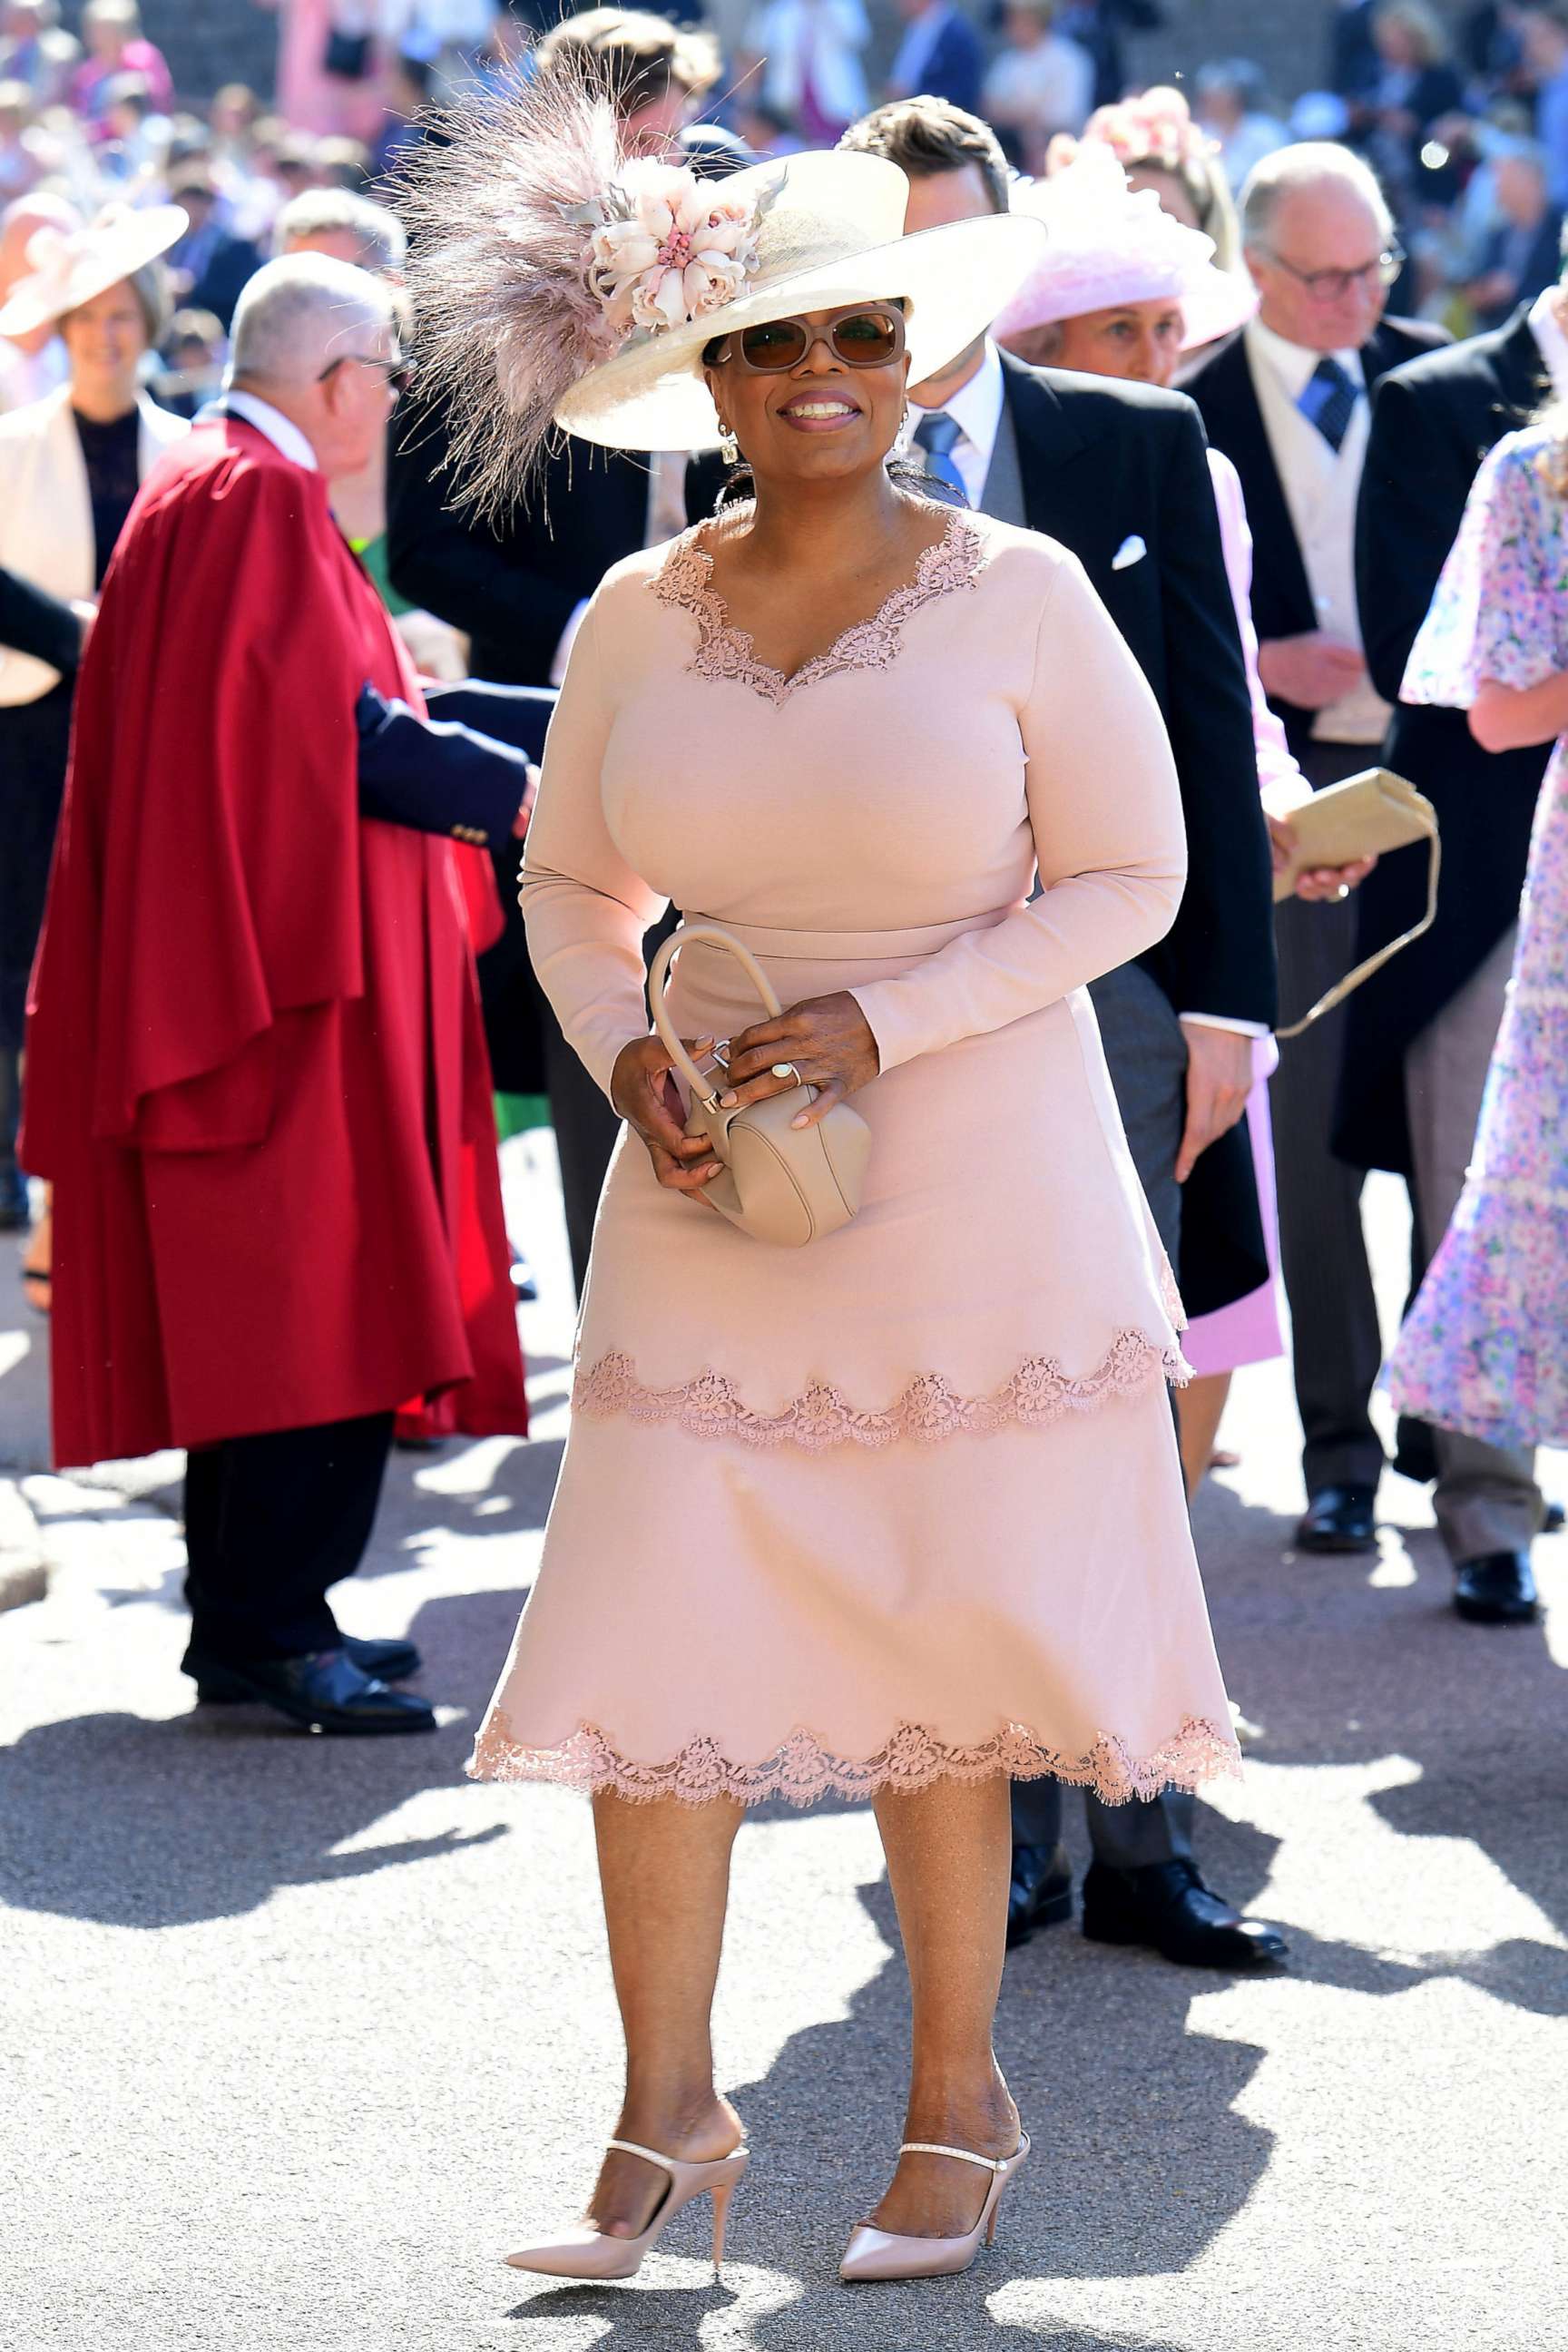 PHOTO: Oprah Winfrey arrives at St George's Chapel at Windsor Castle before the wedding of Prince Harry to Meghan Markle, May 19, 2018, in Windsor, England.